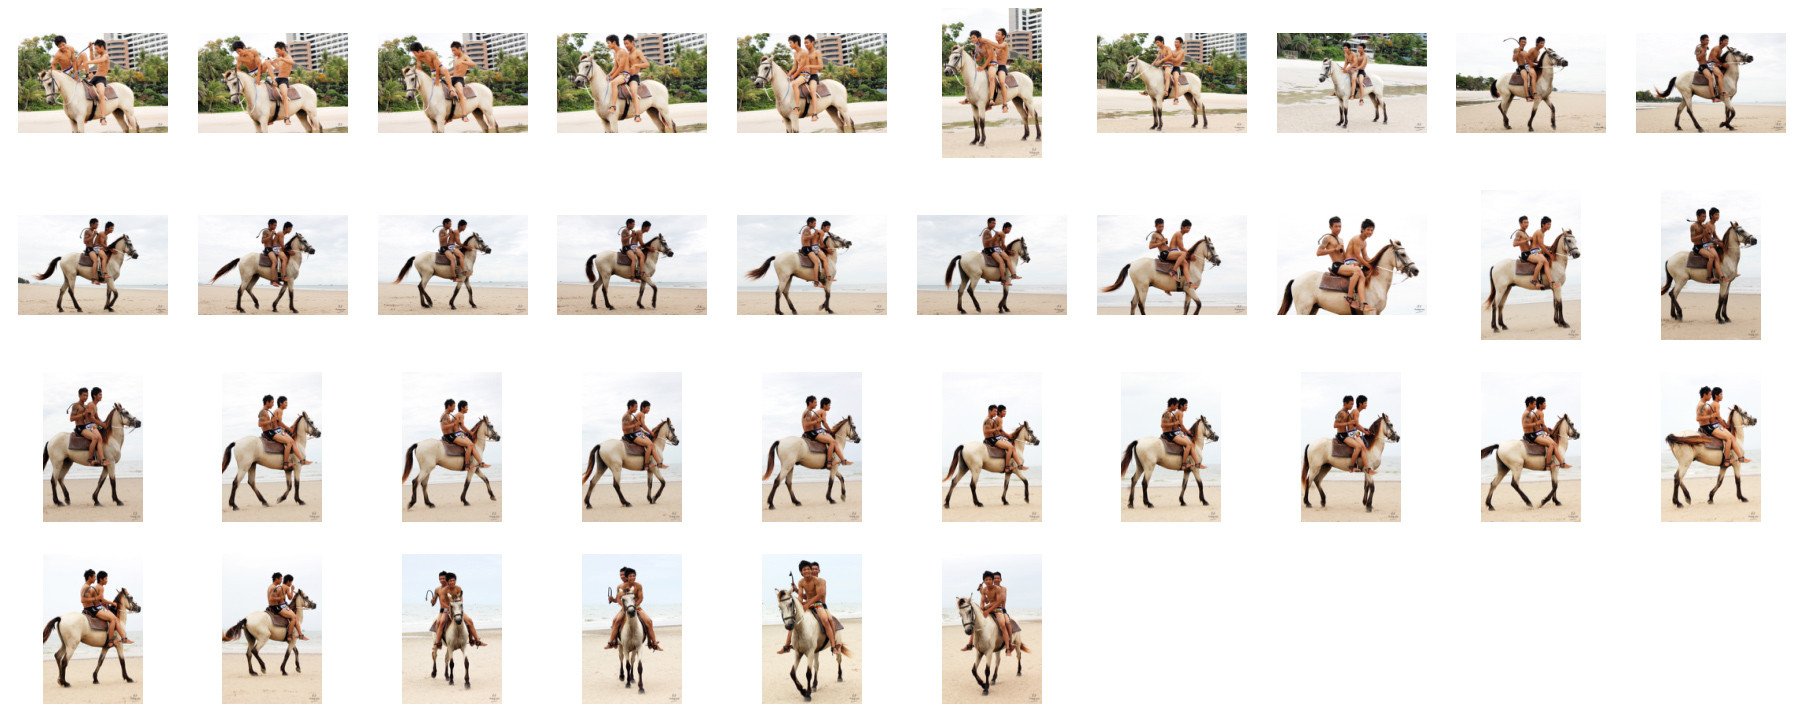 David and Thaksin in Shorts Riding Double with Saddle on Buckskin Horse, Part 9 - Riding.Vision